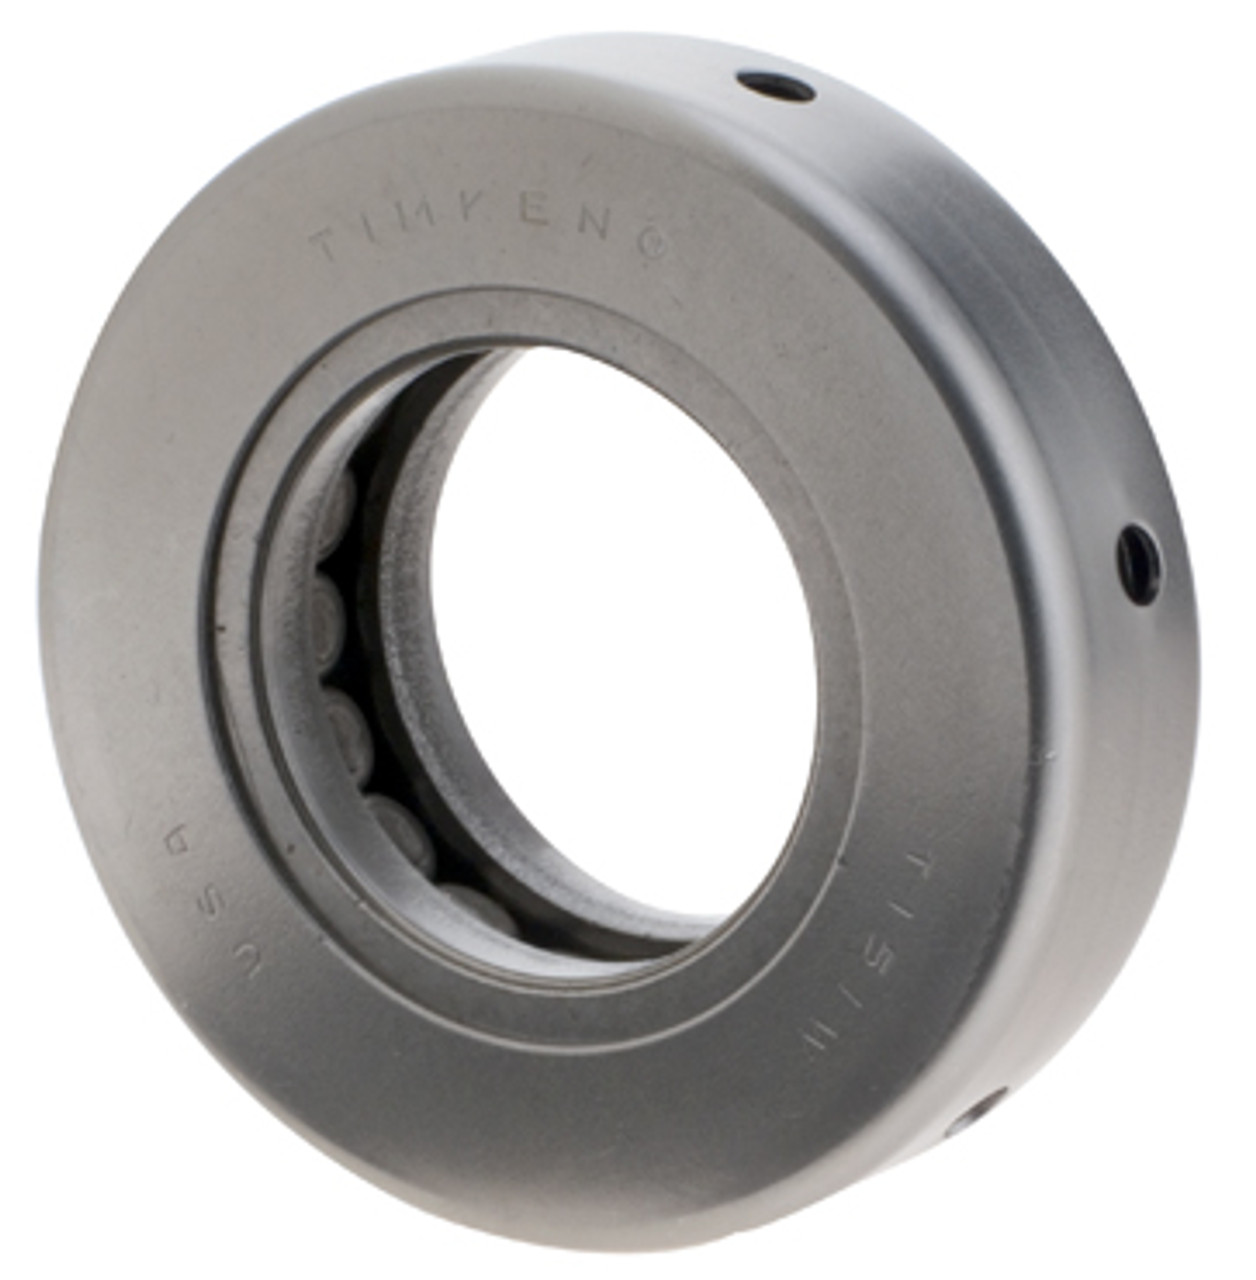 Timken® Stamped Race Thrust Bearing  T139W-904A2